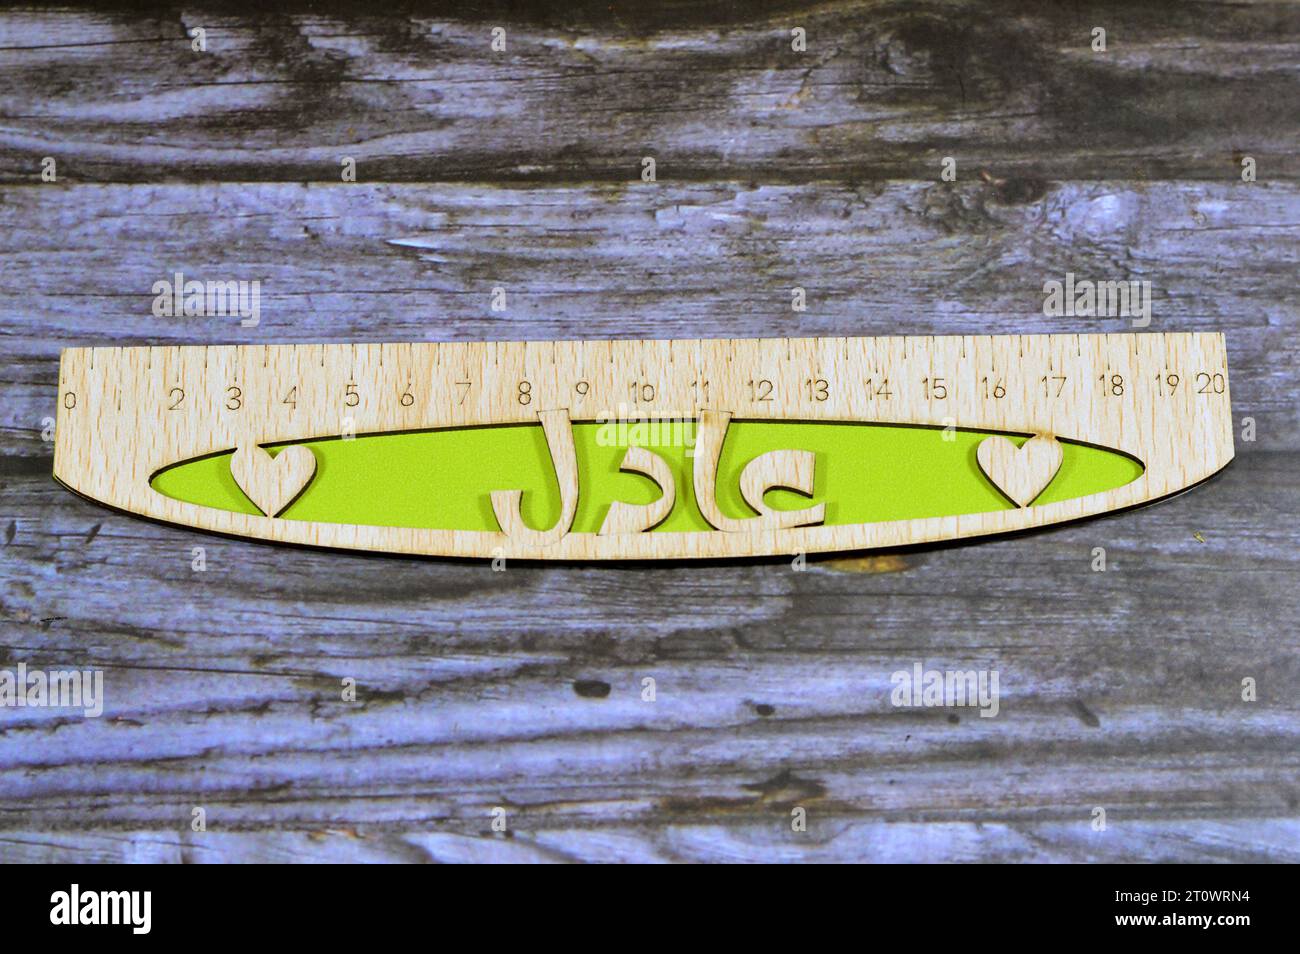 Translation of Arabic name on the ruler (Adel), Arabian common names on wooden rulers, a rule, line gauge, instrument used to make length measurements Stock Photo